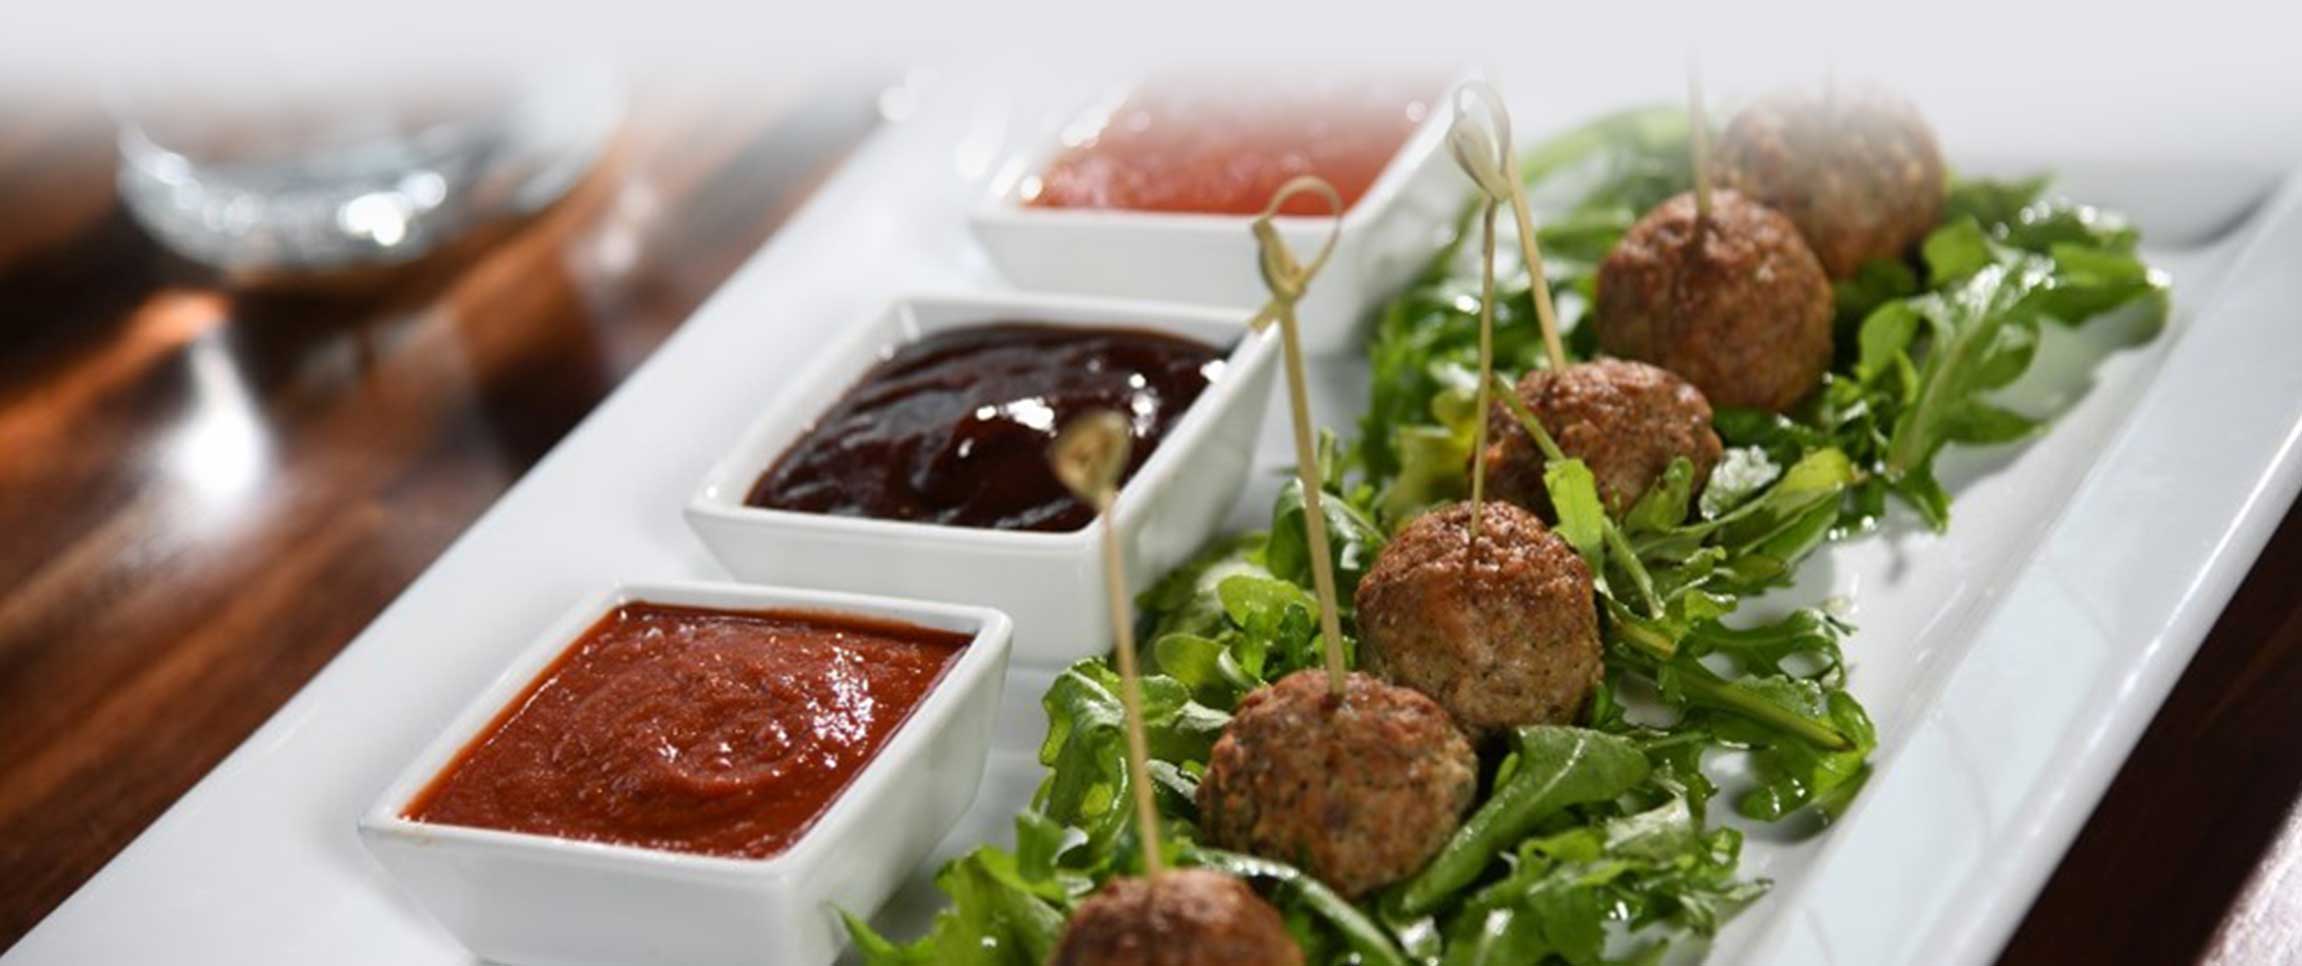 Roma Meatballs with Trio of Sauces